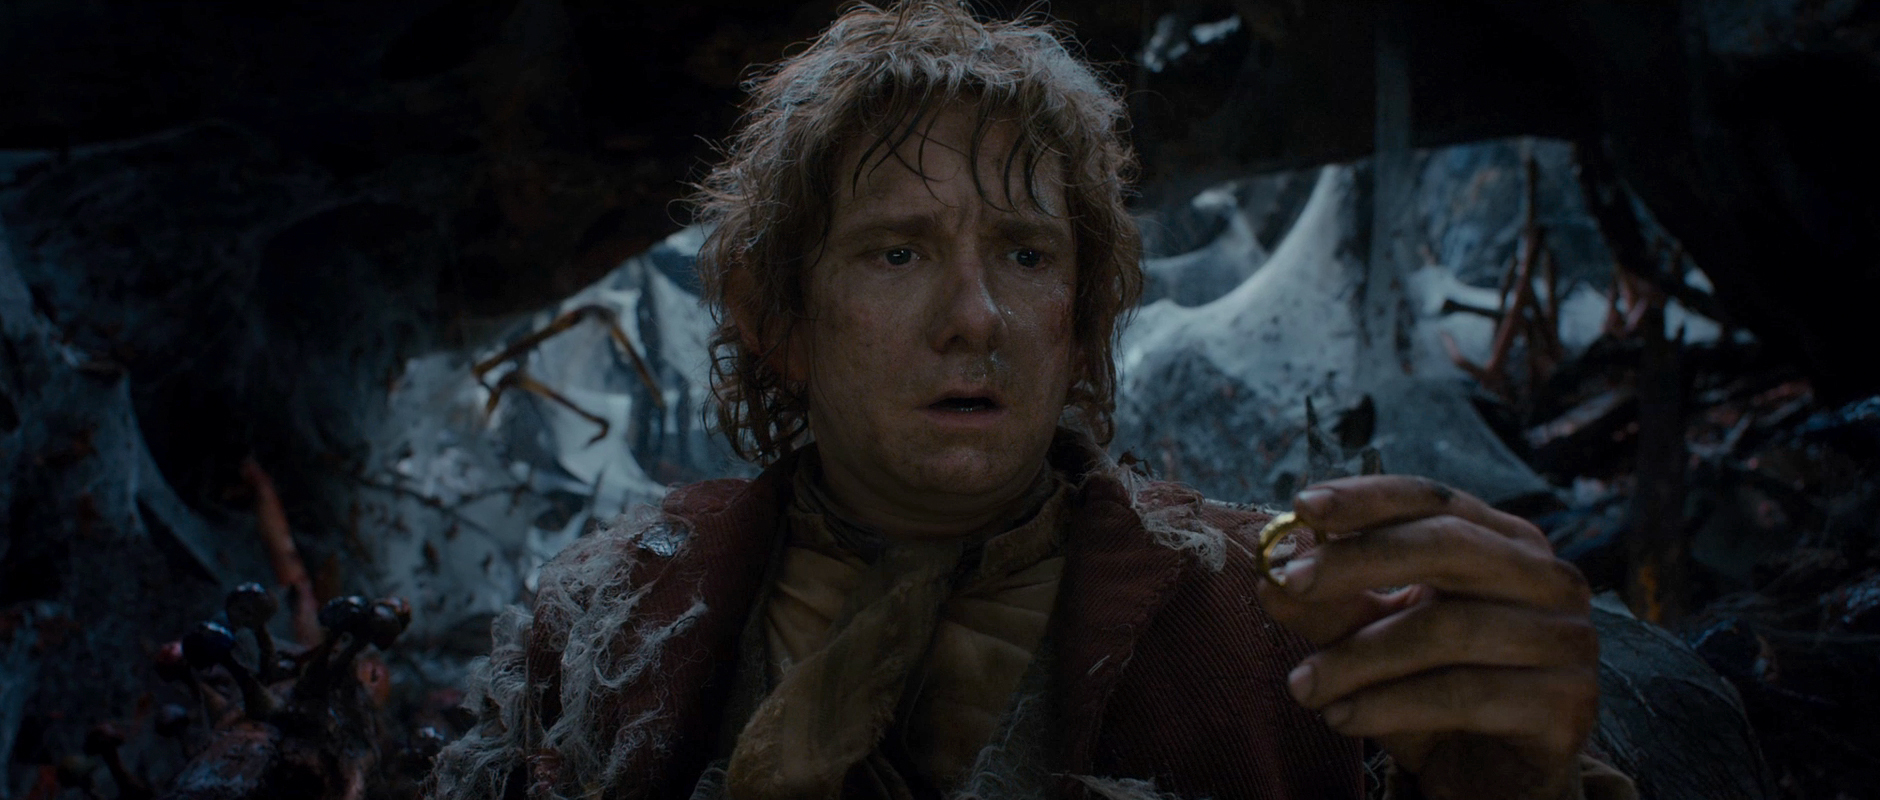 Hero image for The Hobbit: The Desolation of Smaug